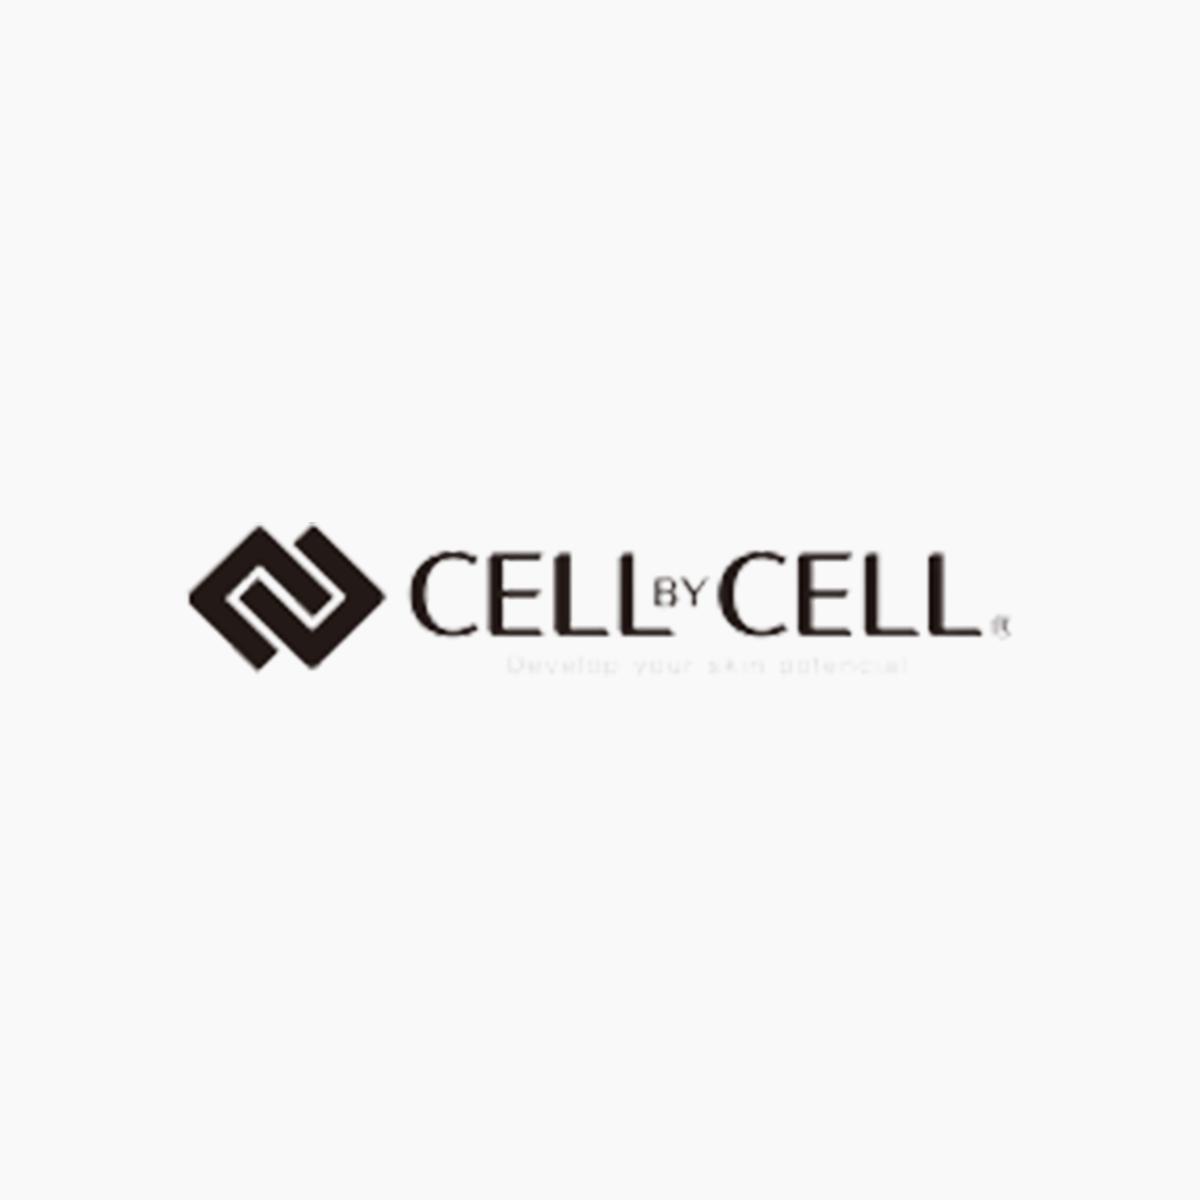 CELLbyCELL